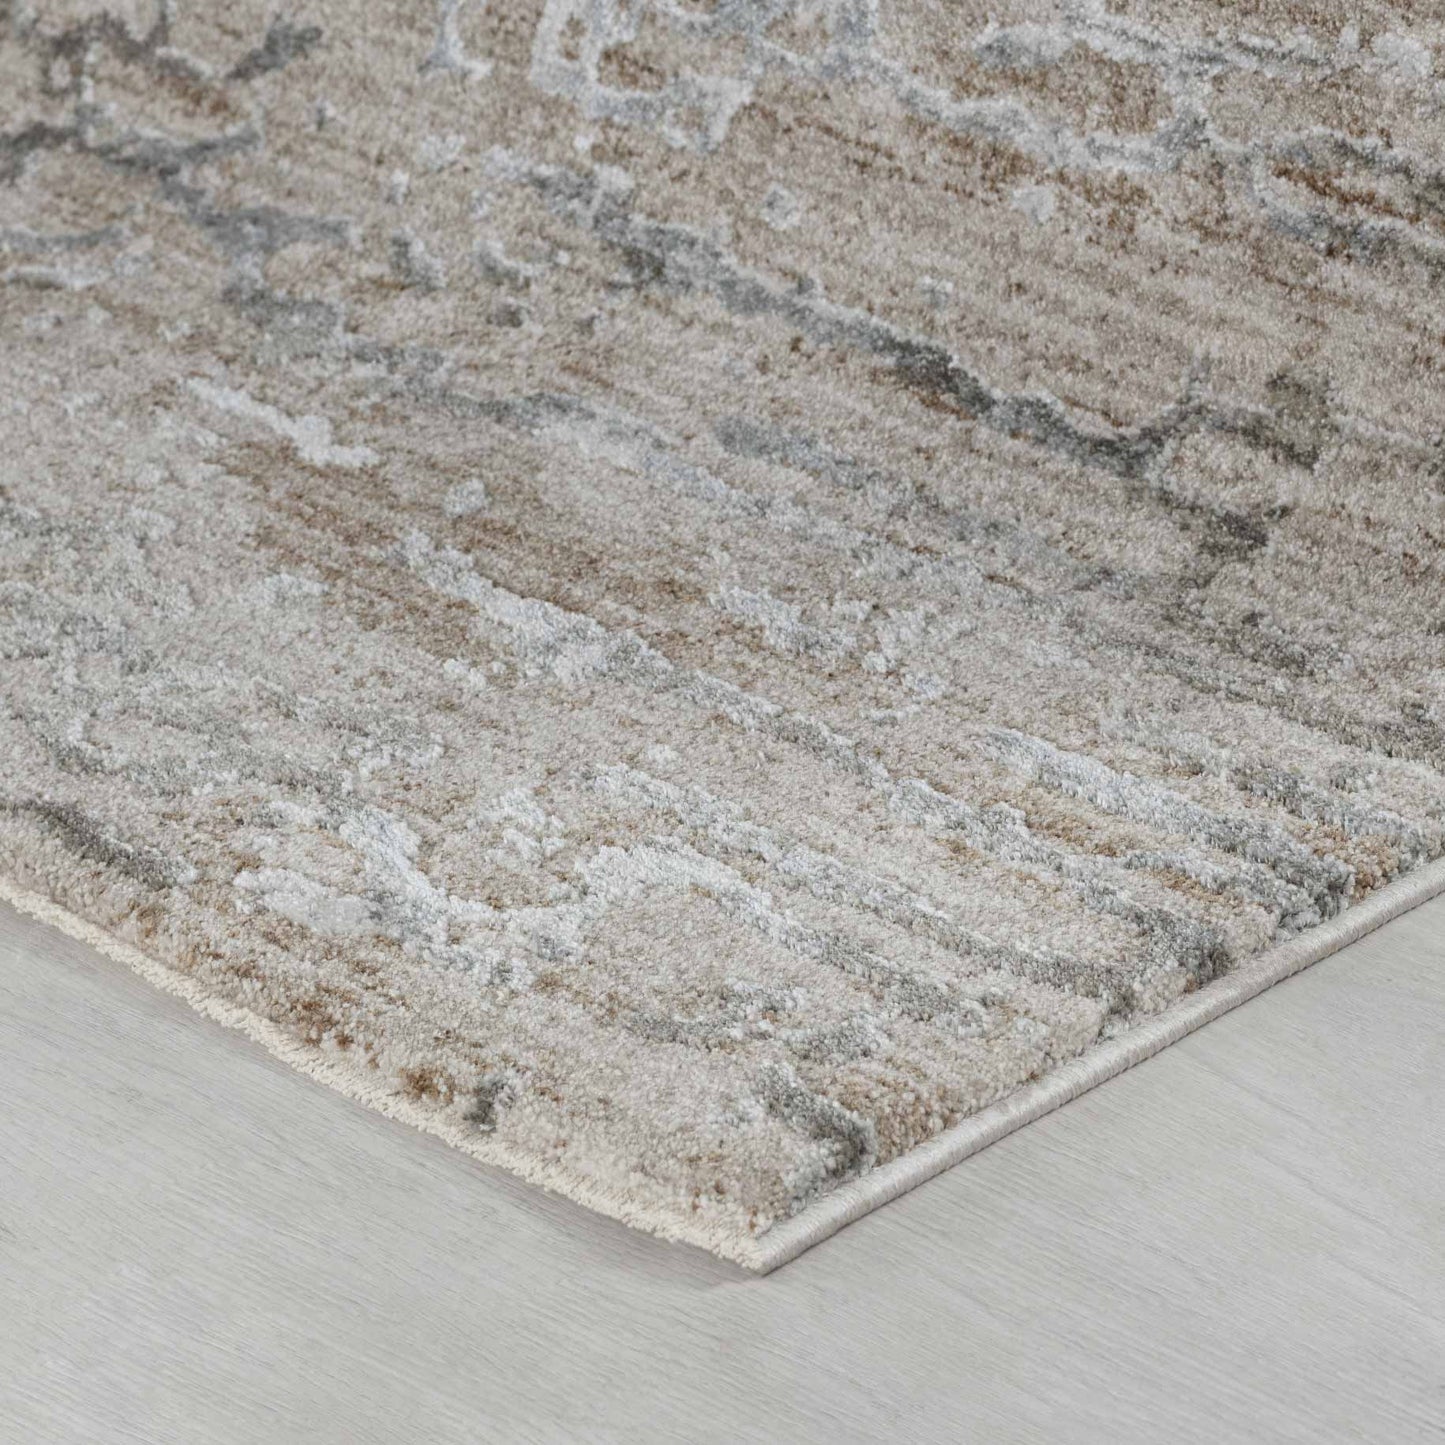 9' X 12' Beige Abstract Stain Resistant Area Rug